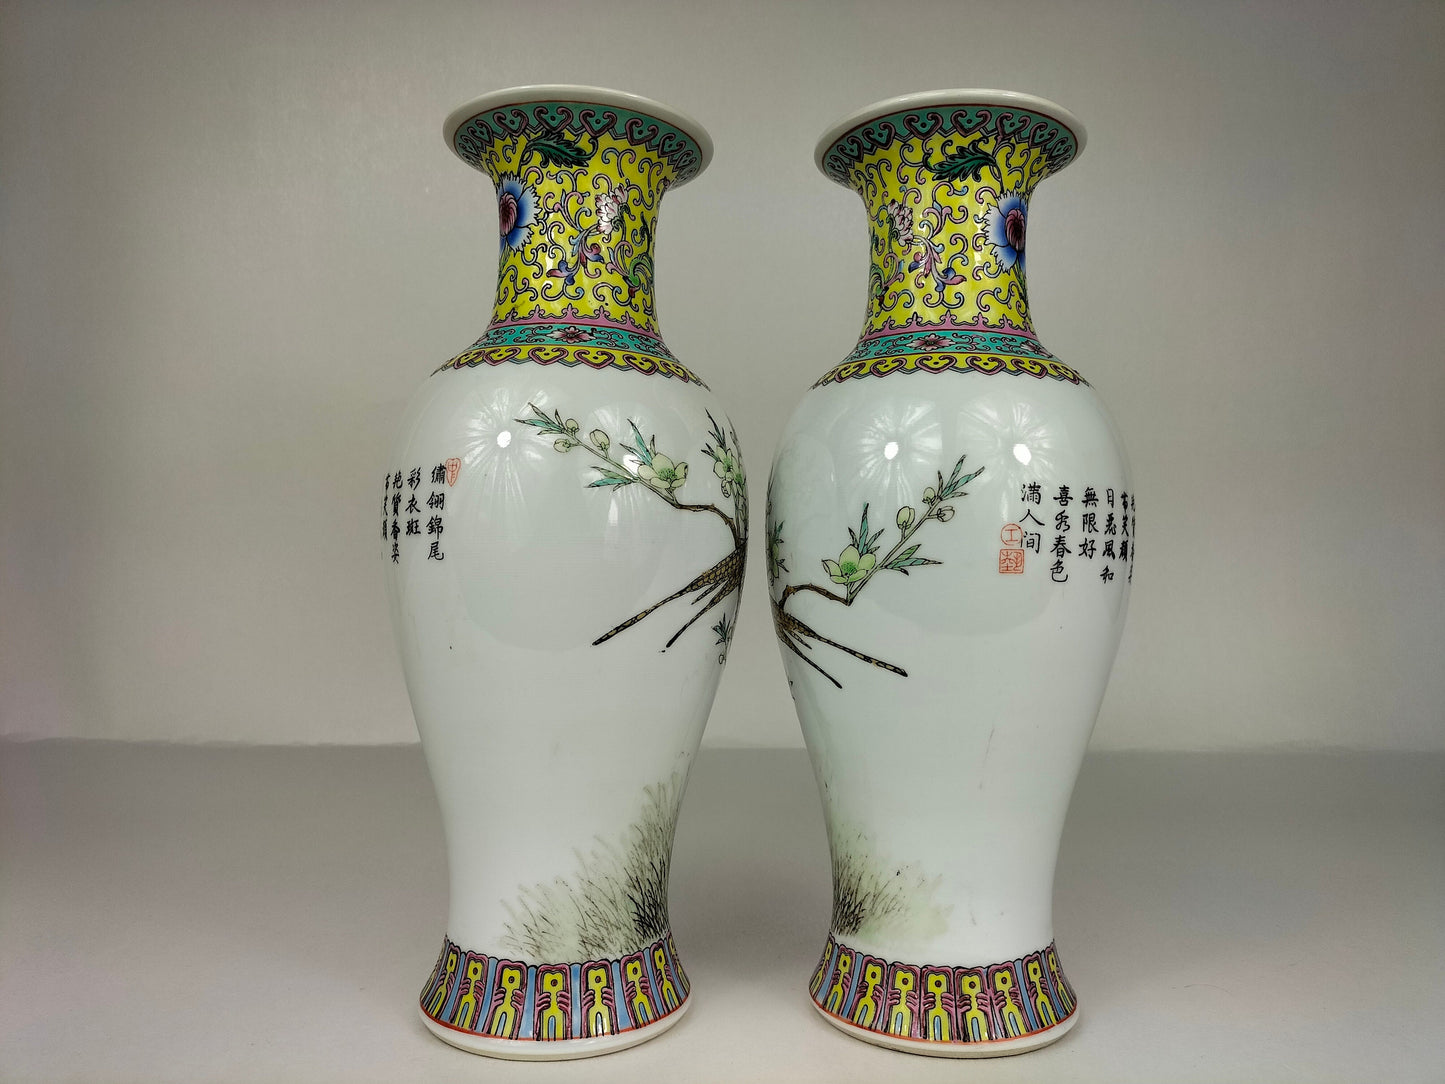 Pair of Chinese famille rose vases decorated with flowers and birds // Jingdezhen - 20th century